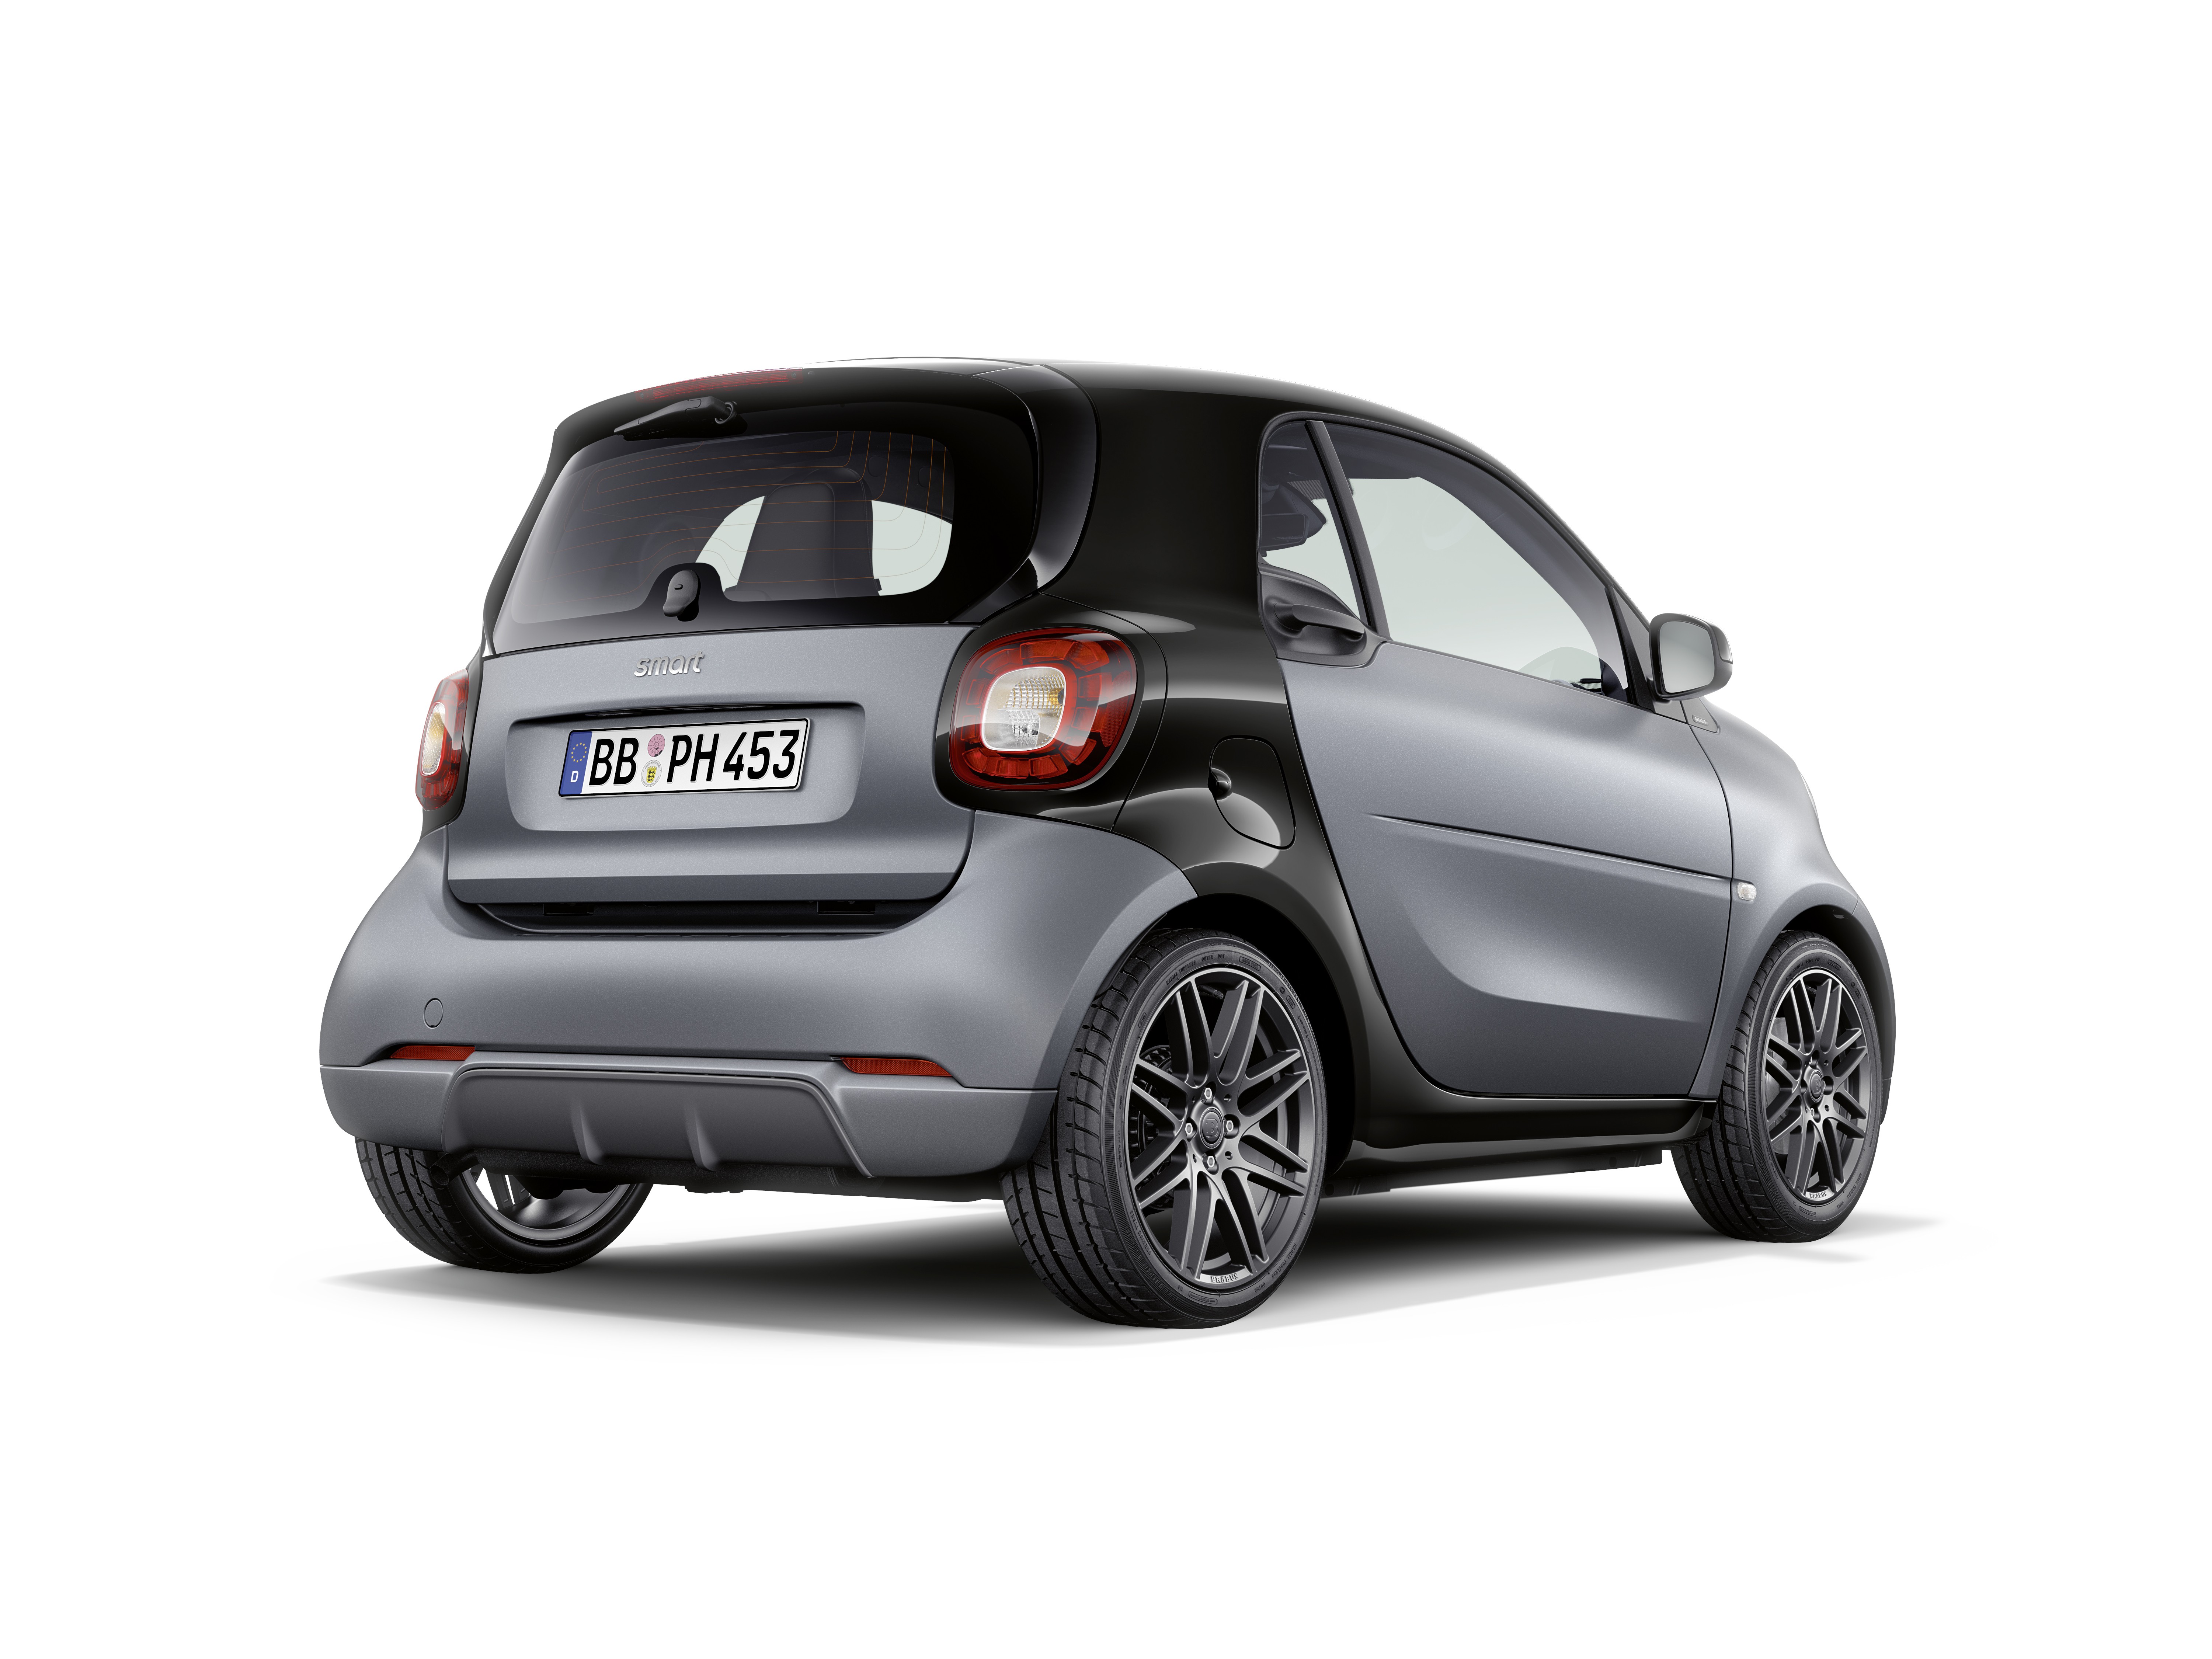 smart Updates fortwo and forfour for Model Year 2016 - autoevolution